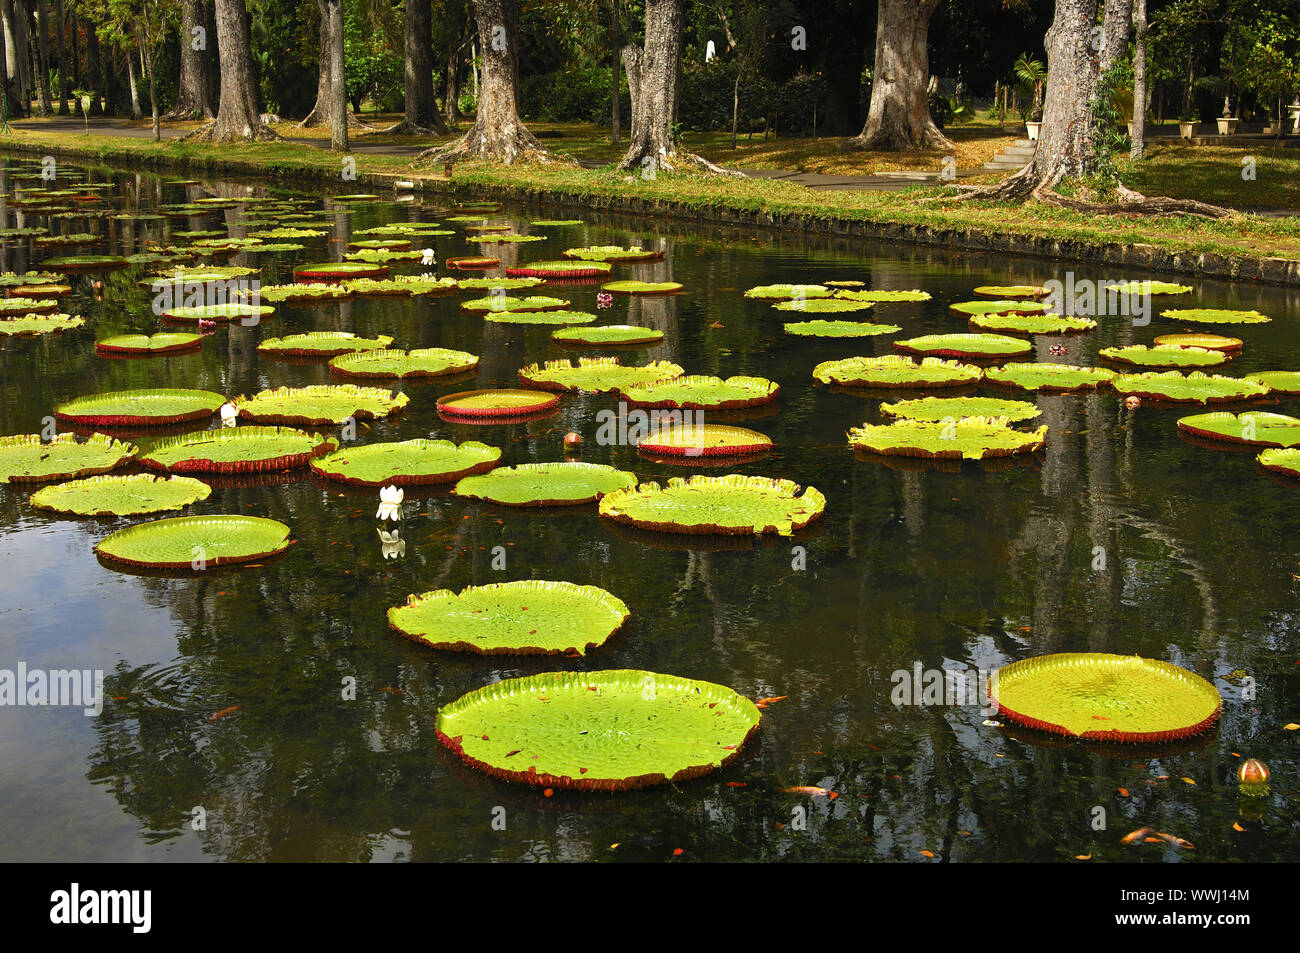 Pond with Amazon water lilies Stock Photo